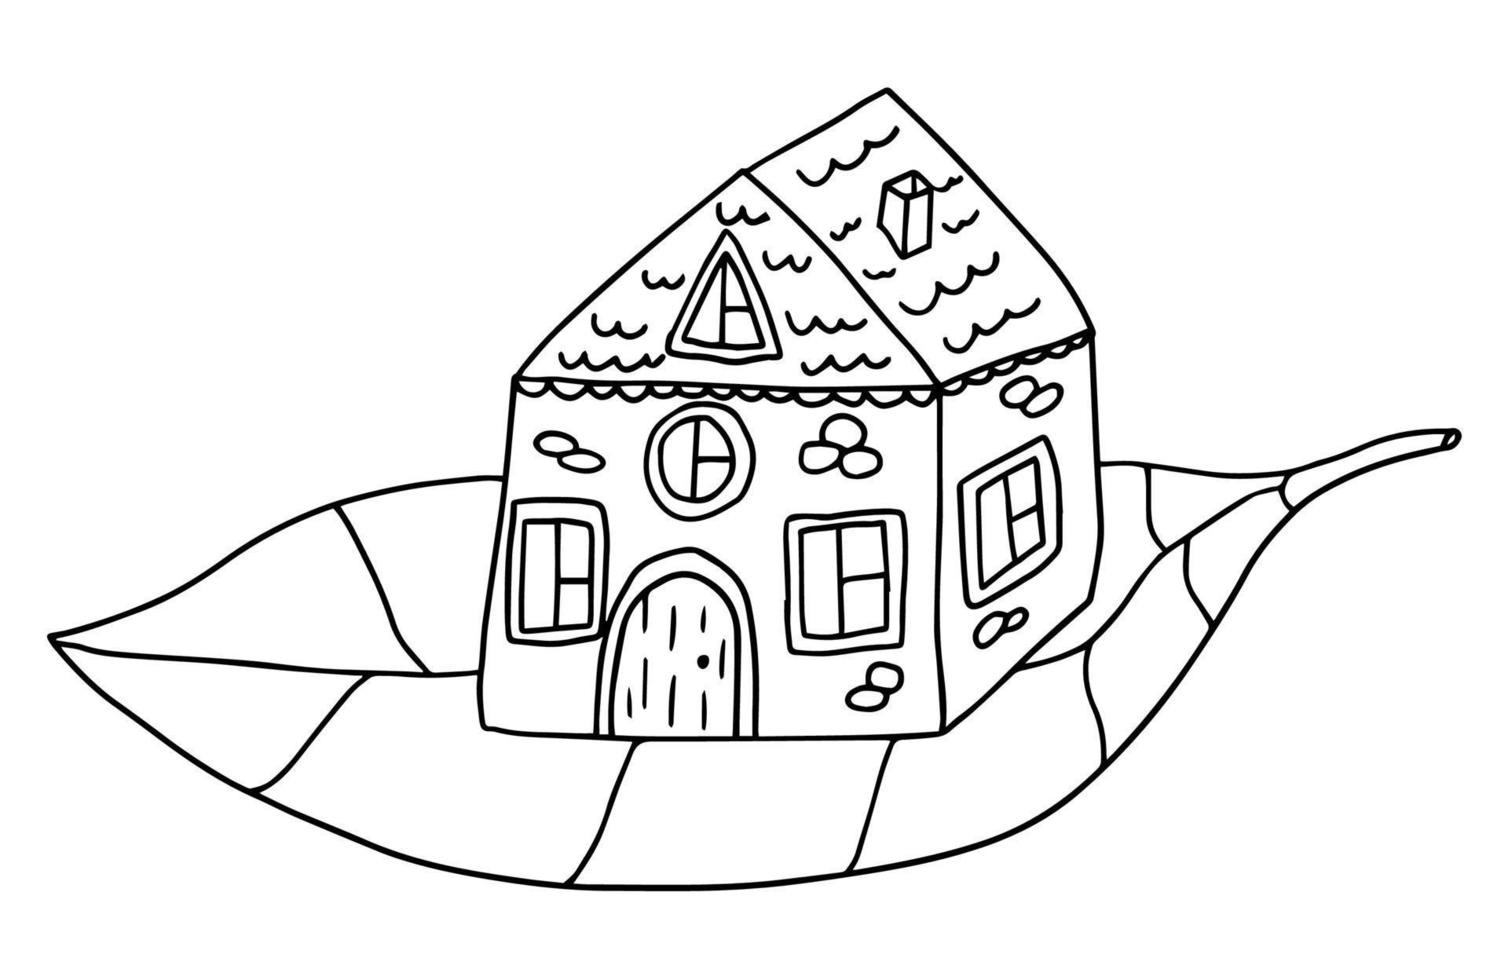 Cute doodle little gnome house on tree leaf isolated on white background. vector